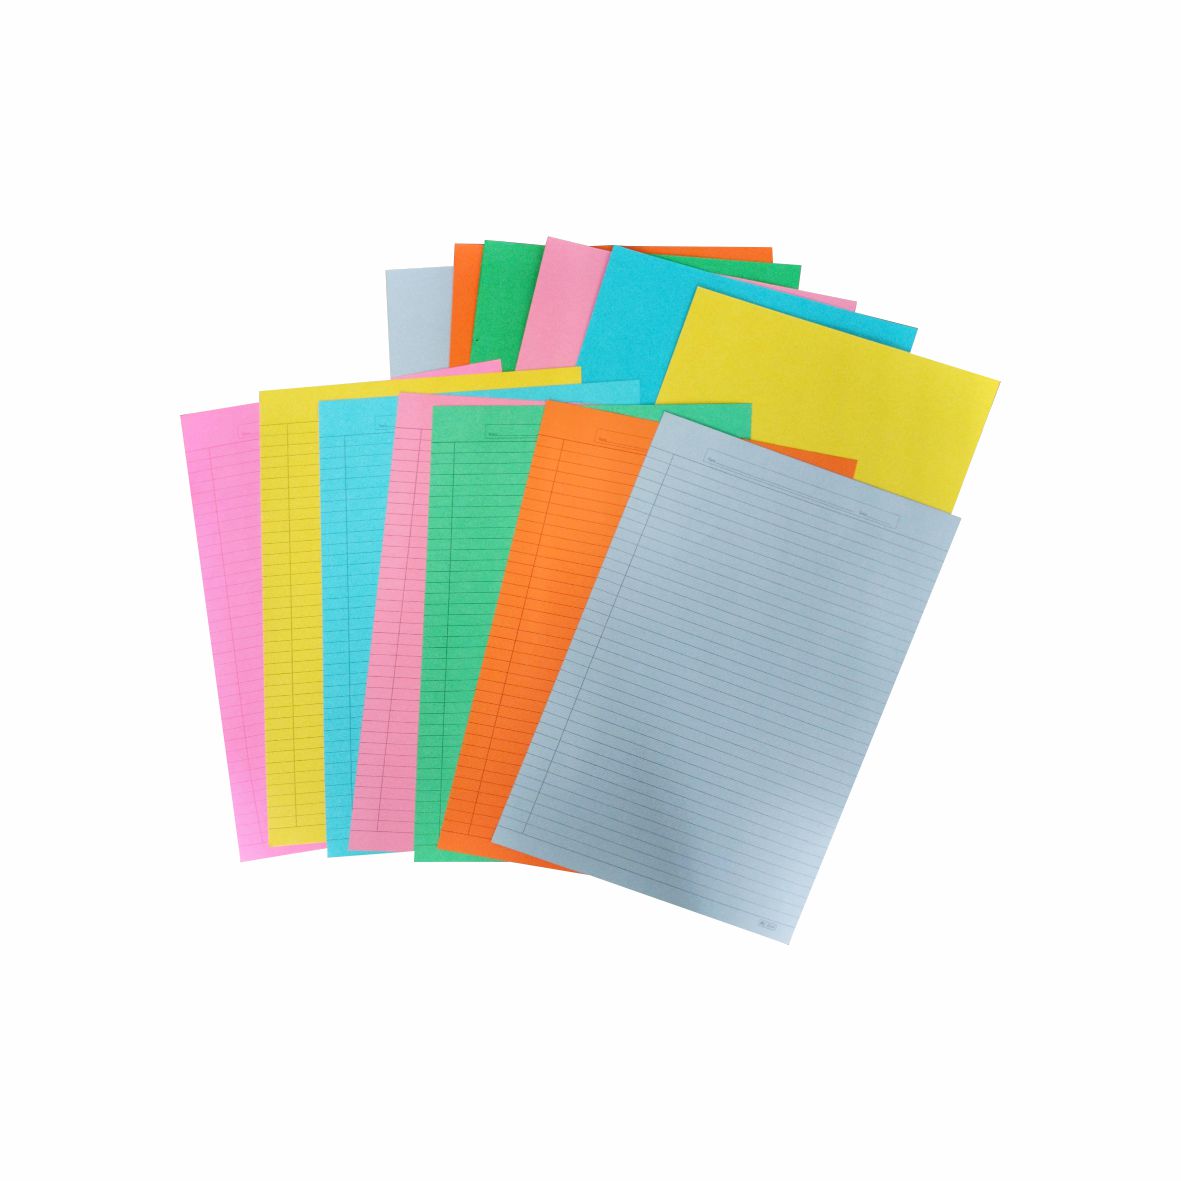 Royal Pacific White Computer Paper Sheets at Rs 330/piece in Mumbai